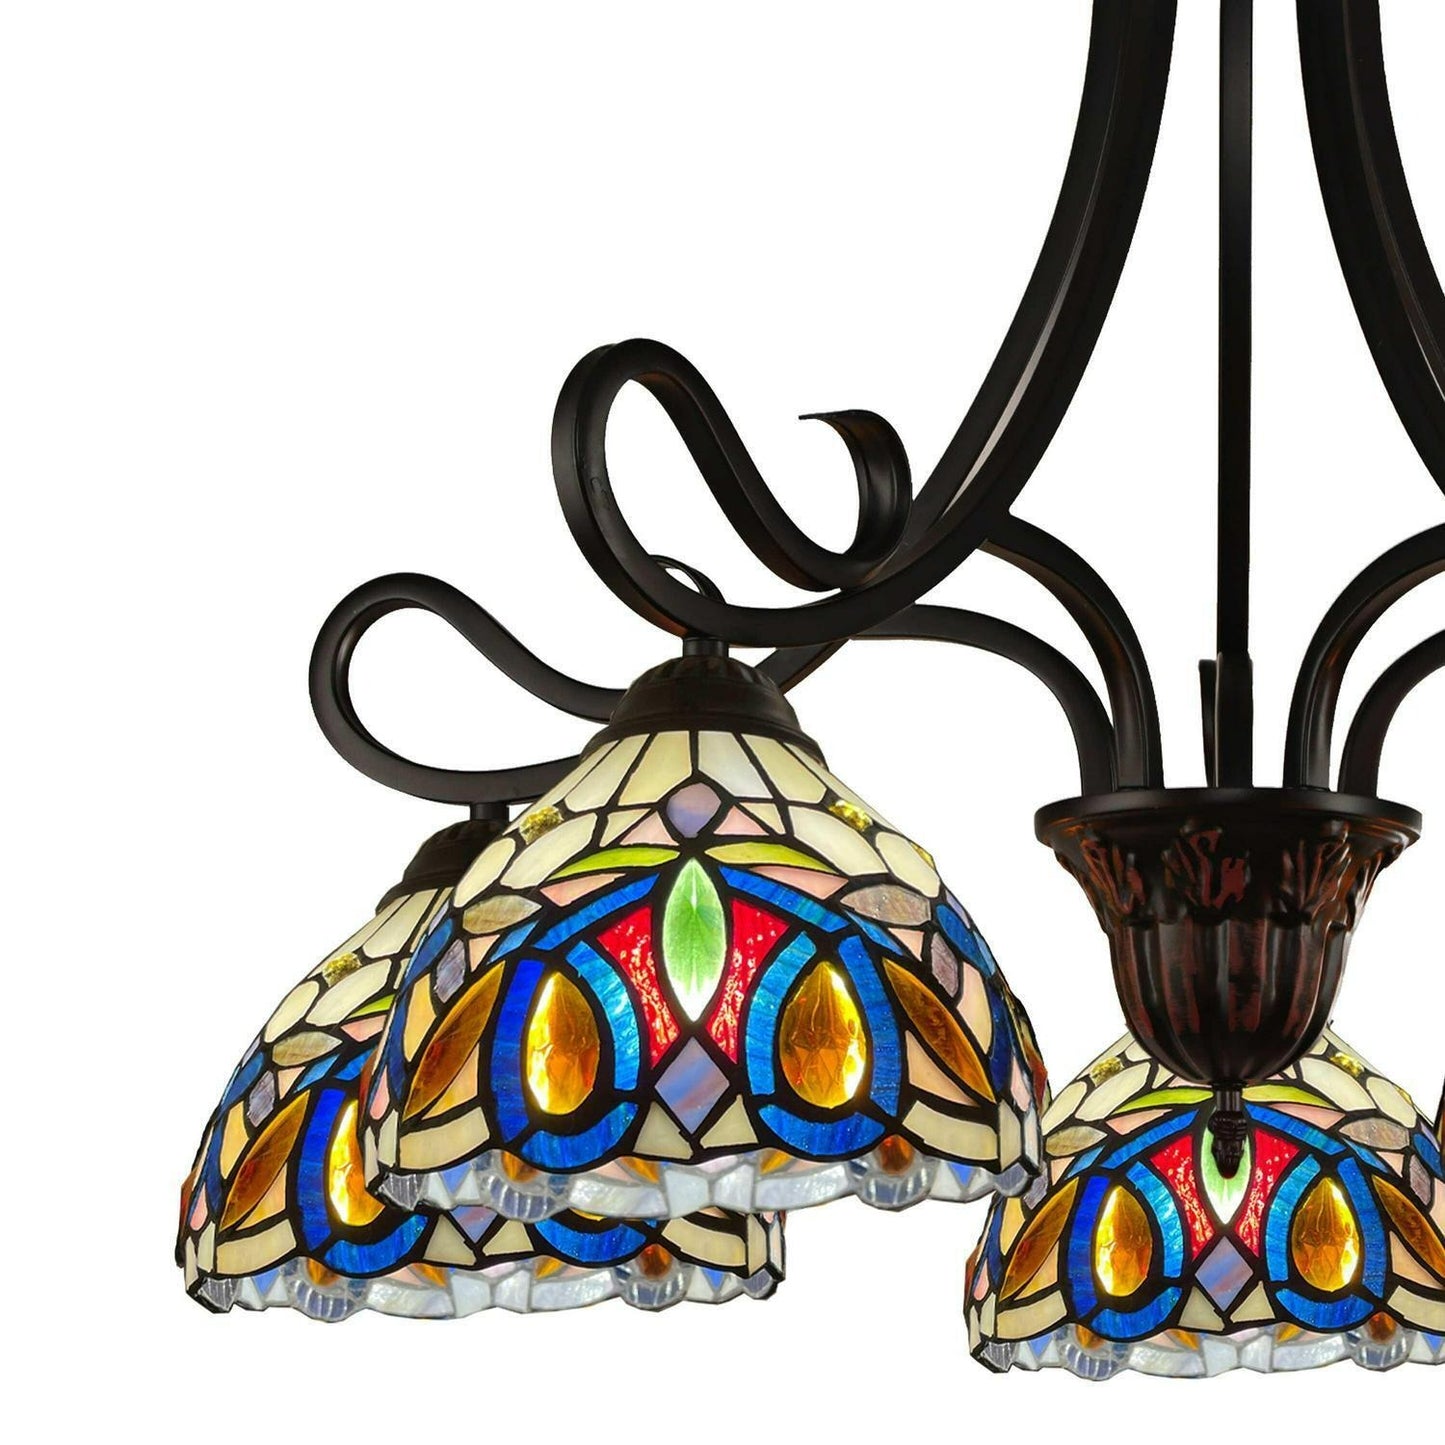 Stained Glass Blue Accent Victorian Tiffany Style Chandelier Ceiling Light